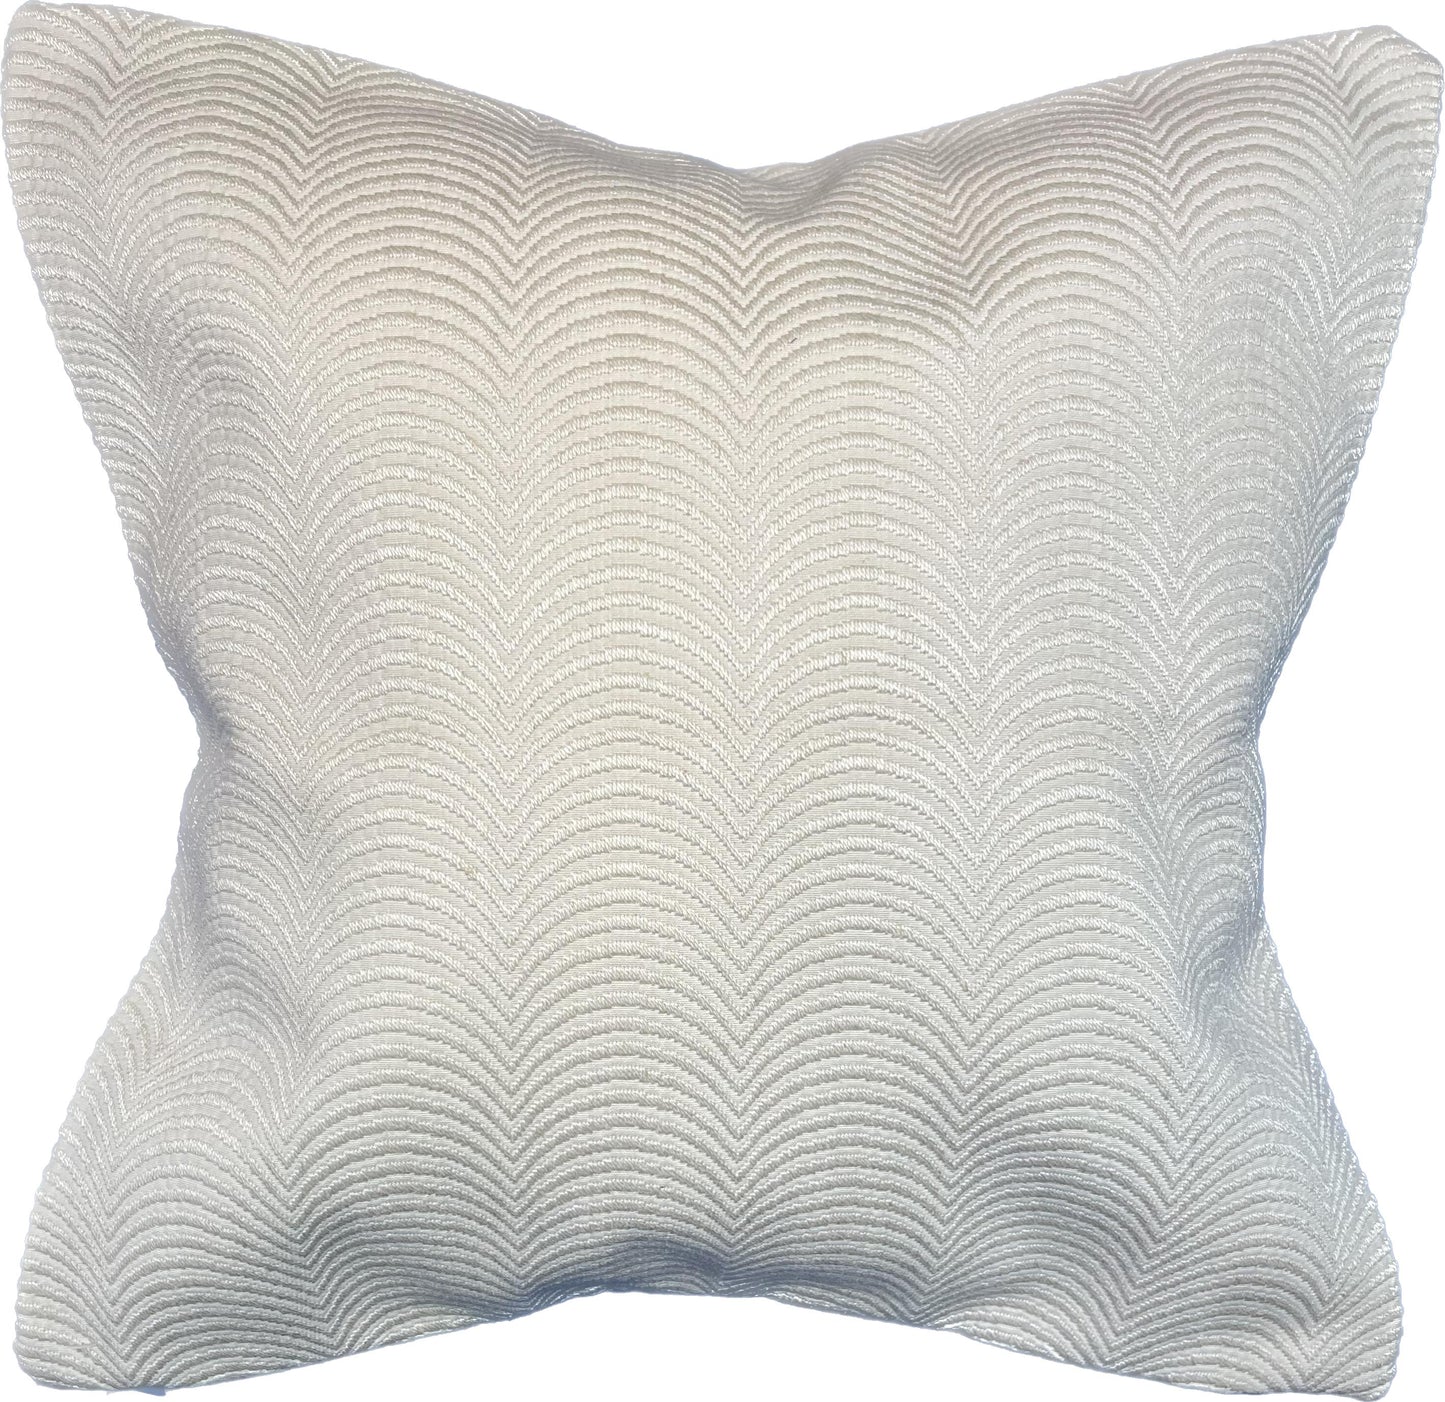 20"x20" Wave Design Pillow Cover